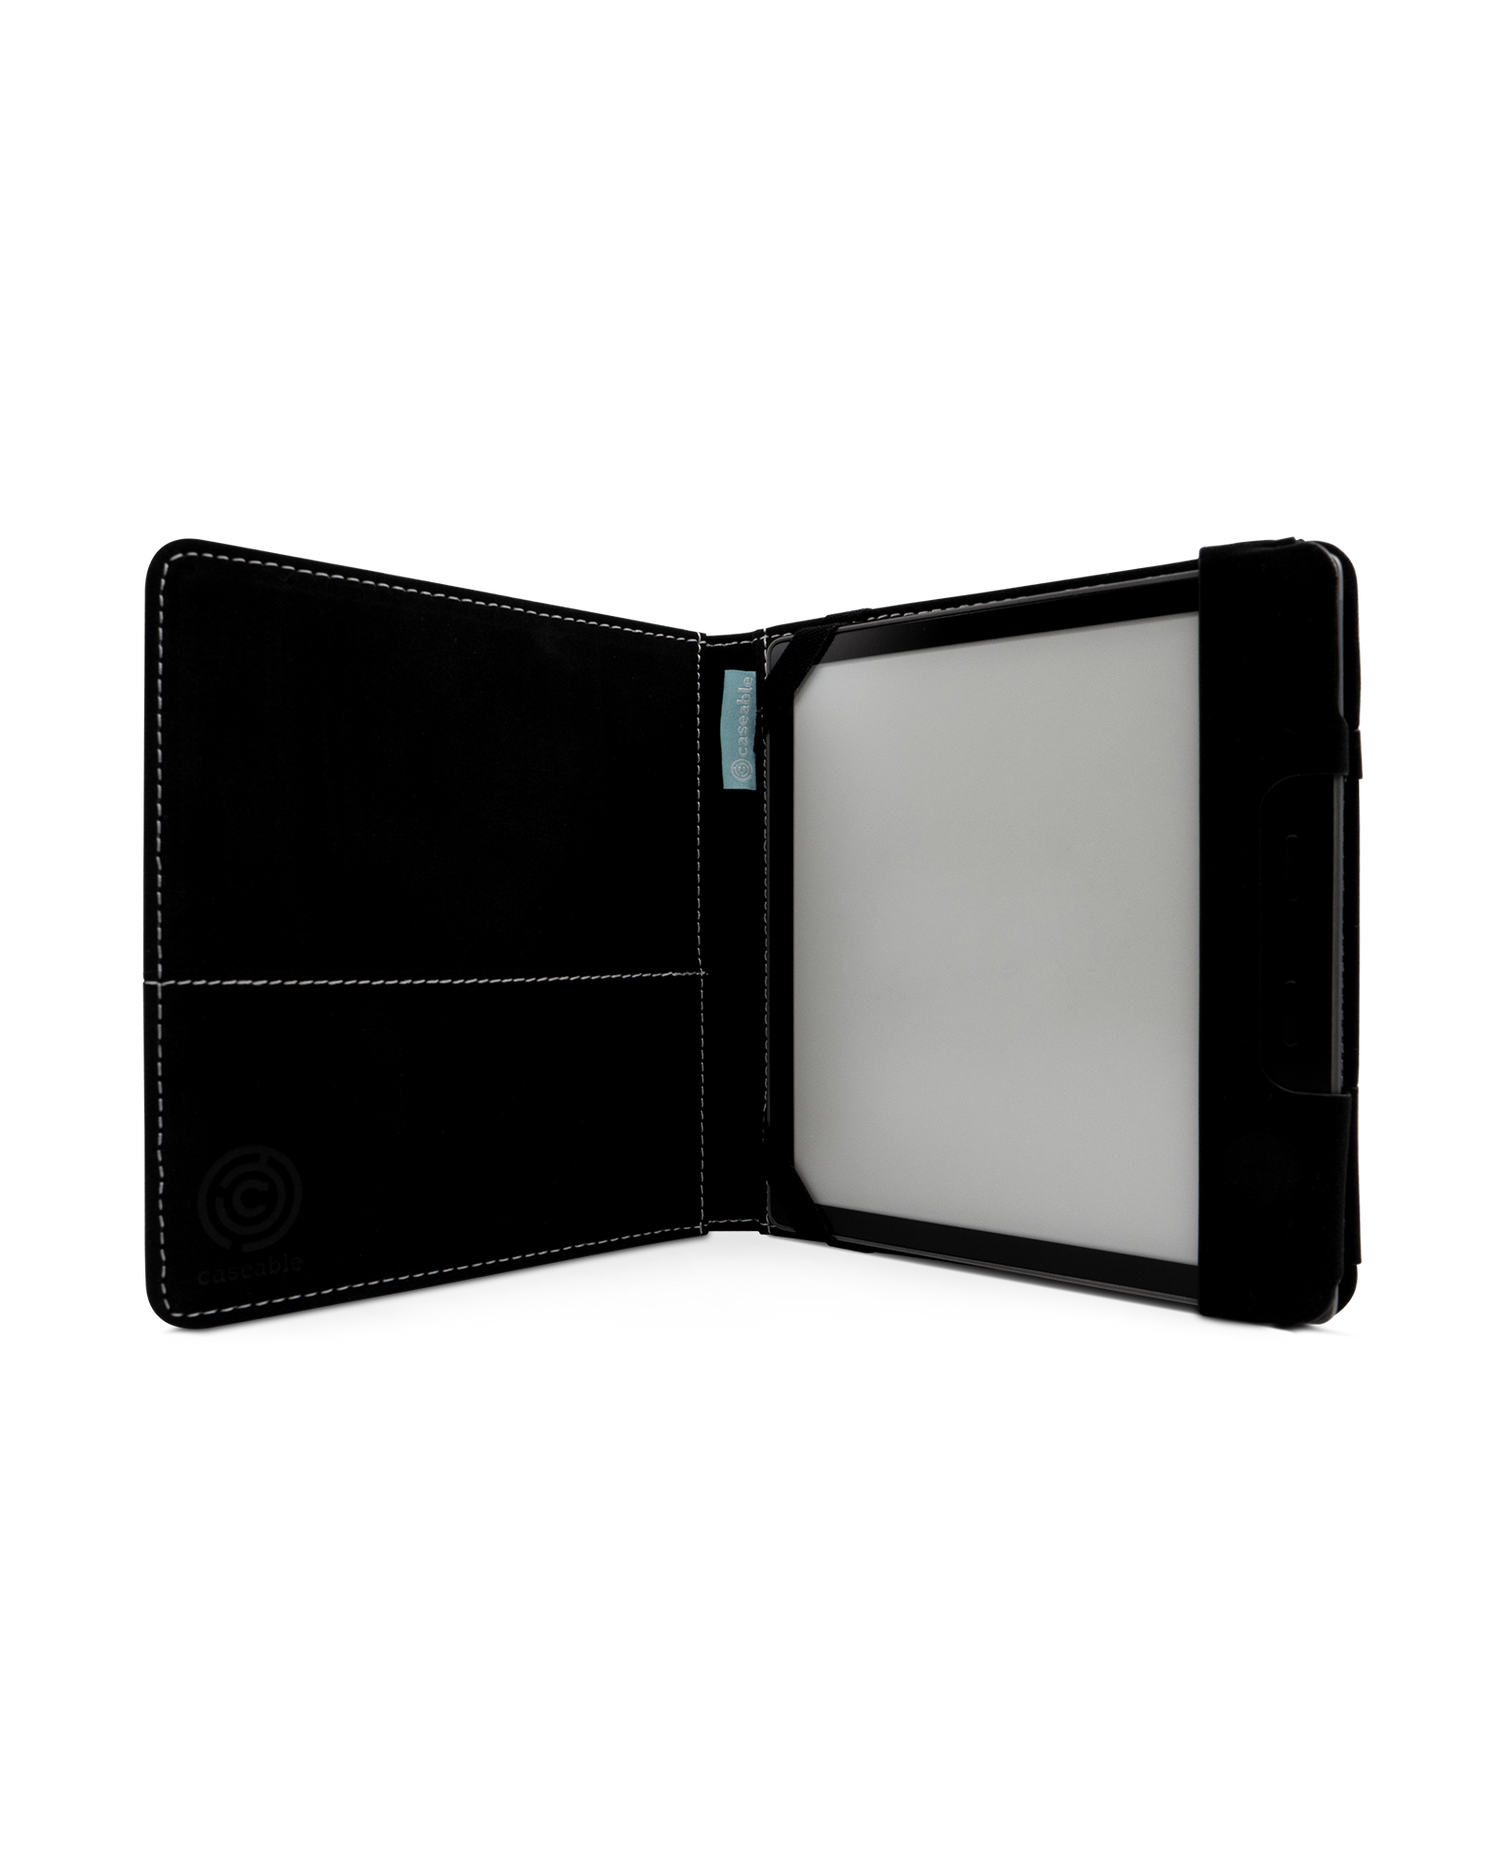 Outer Space eReader Case for tolino vision 6: Opened interior view